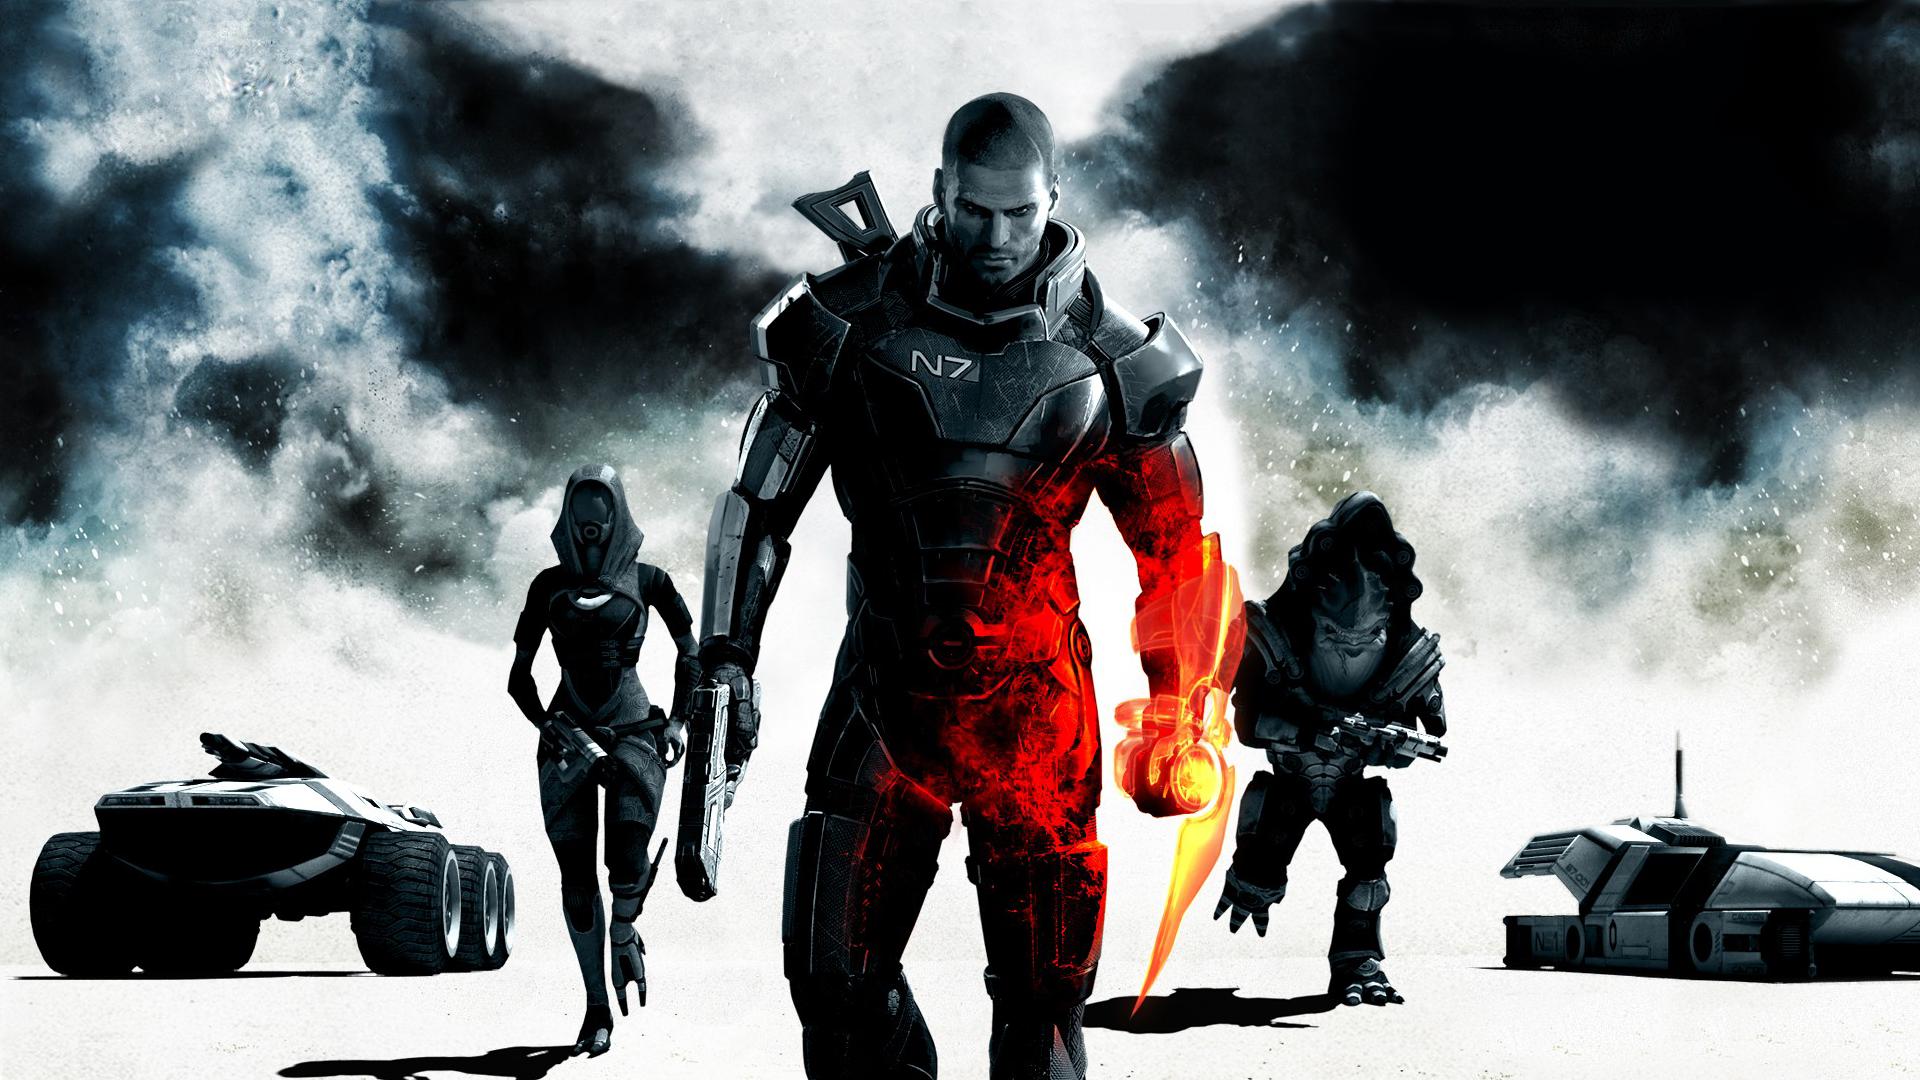 mass effect live wallpaper,fictional character,movie,superhero,action film,pc game